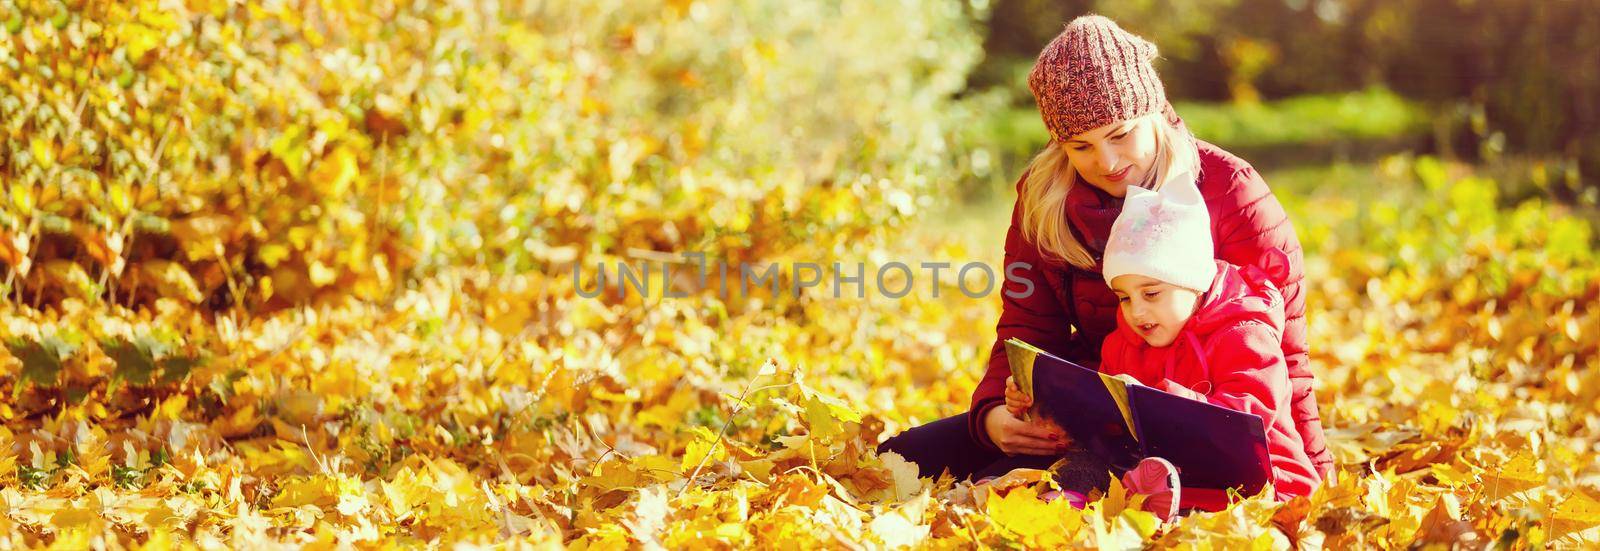 mother teaching daughter in autumn park, Mother teaching daughter to read.